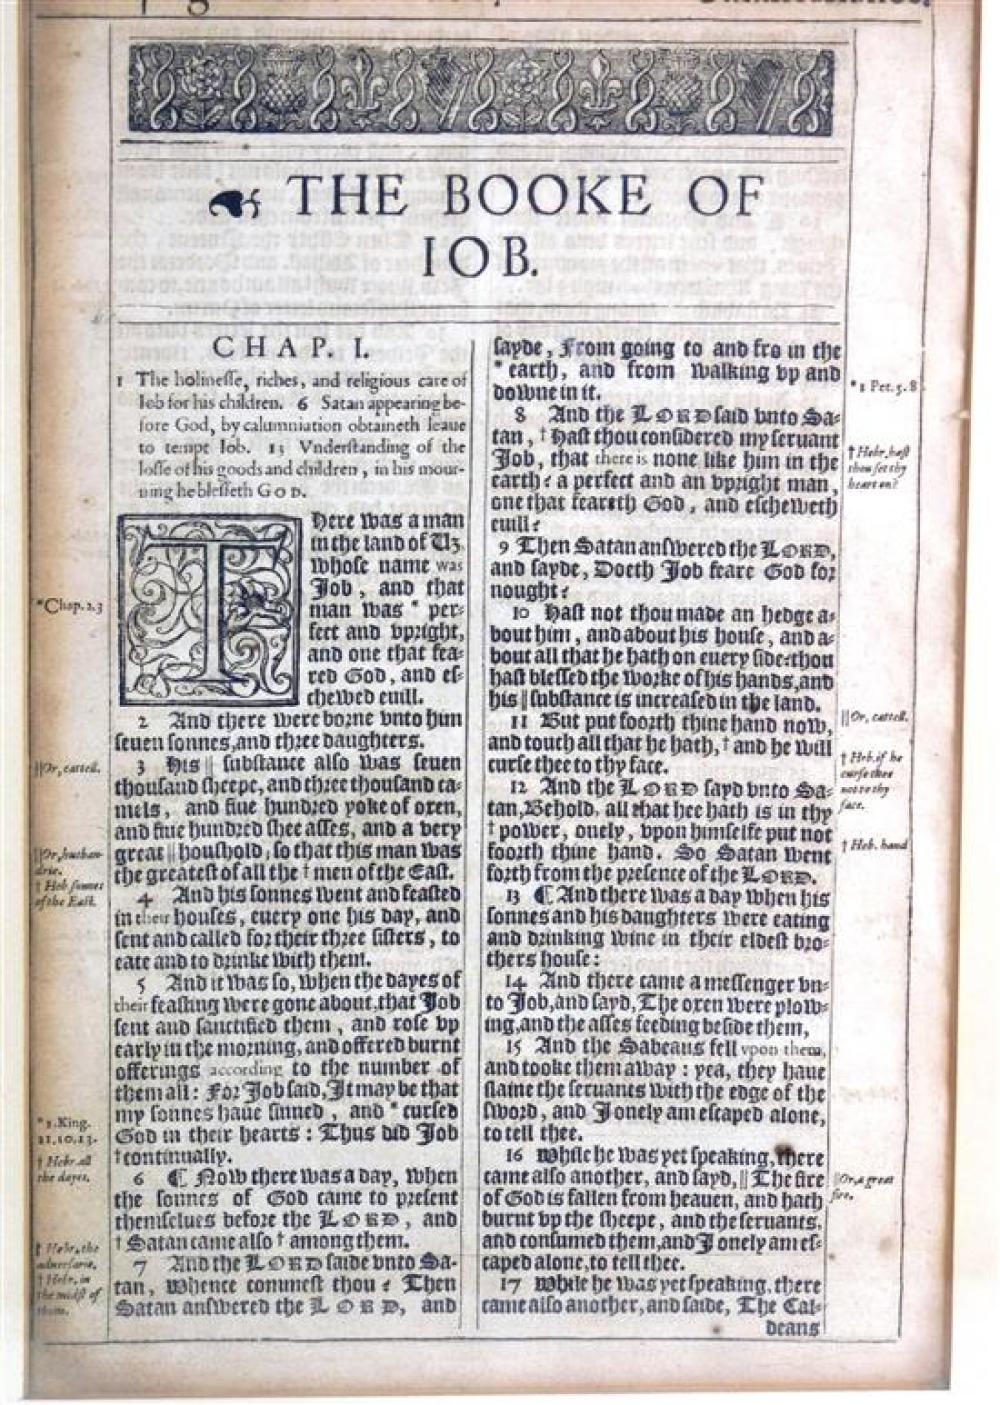 ORIGINAL LEAF FROM THE 1611 EDITION 31d9b4